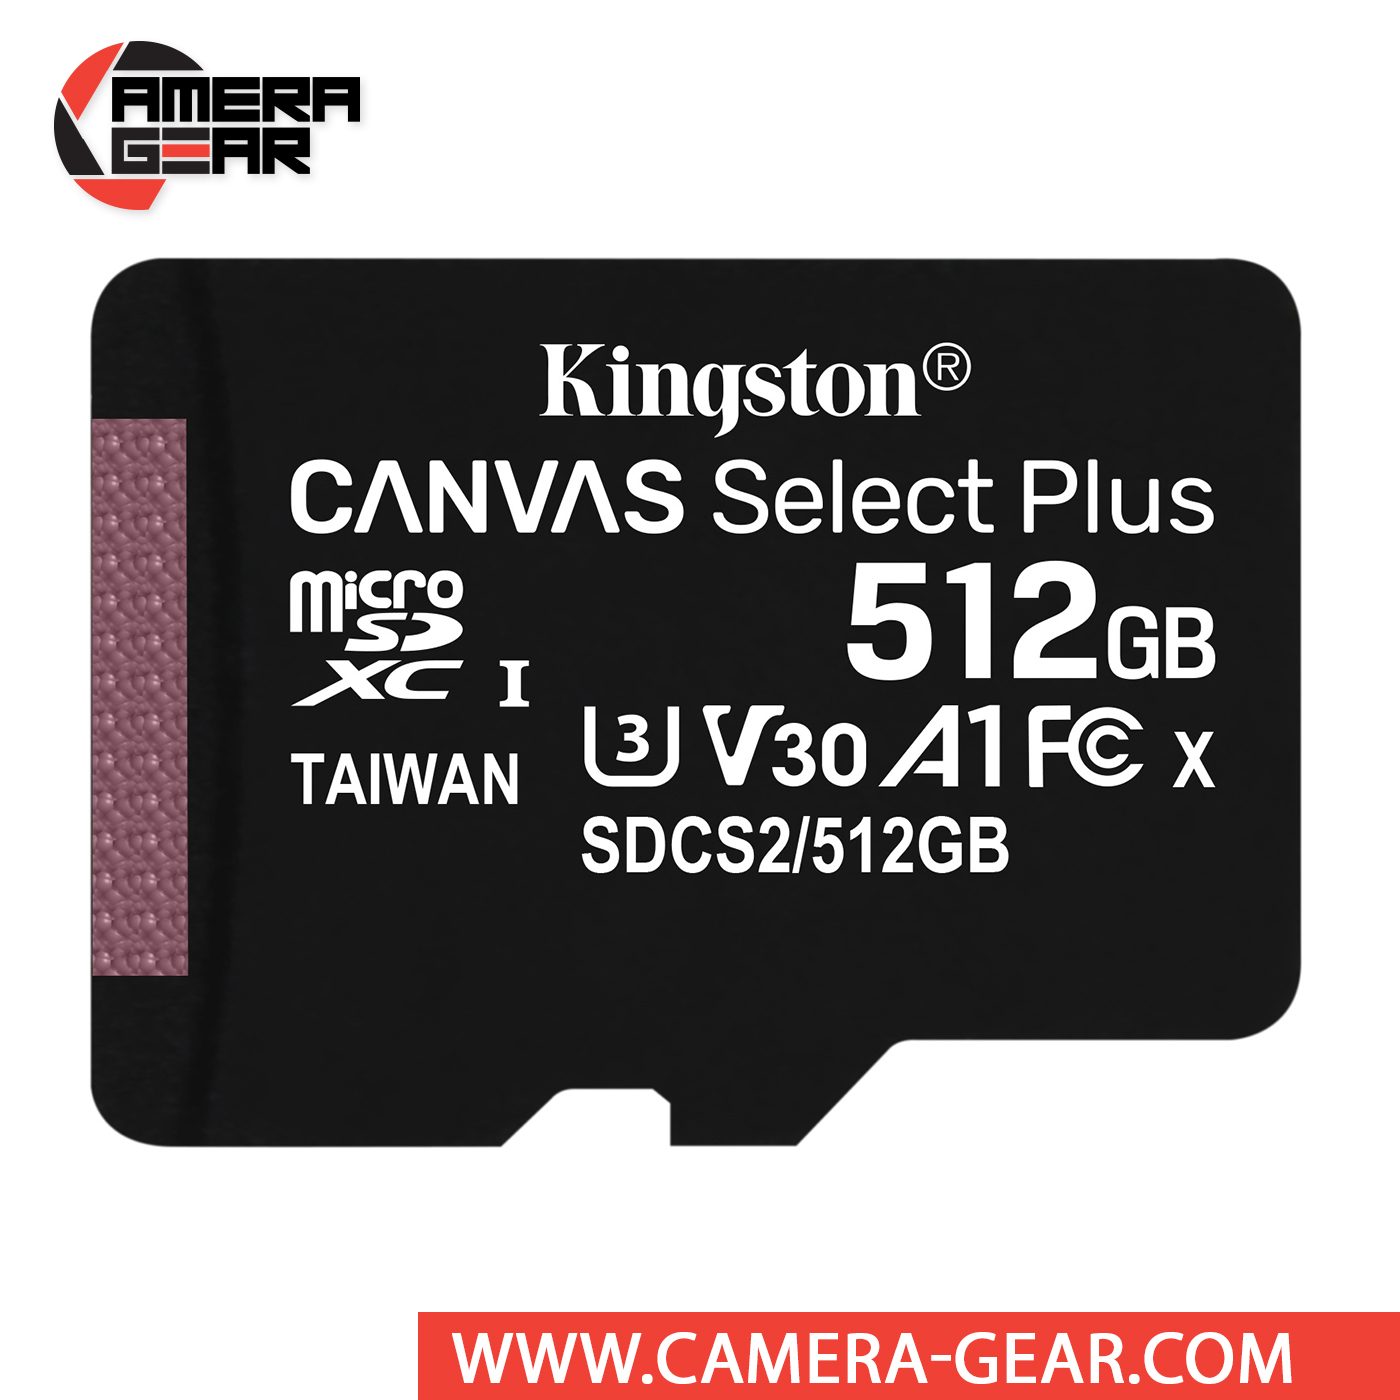 100MBs Works with Kingston Kingston 512GB Asus ZenFone 2 MicroSDXC Canvas Select Plus Card Verified by SanFlash. 